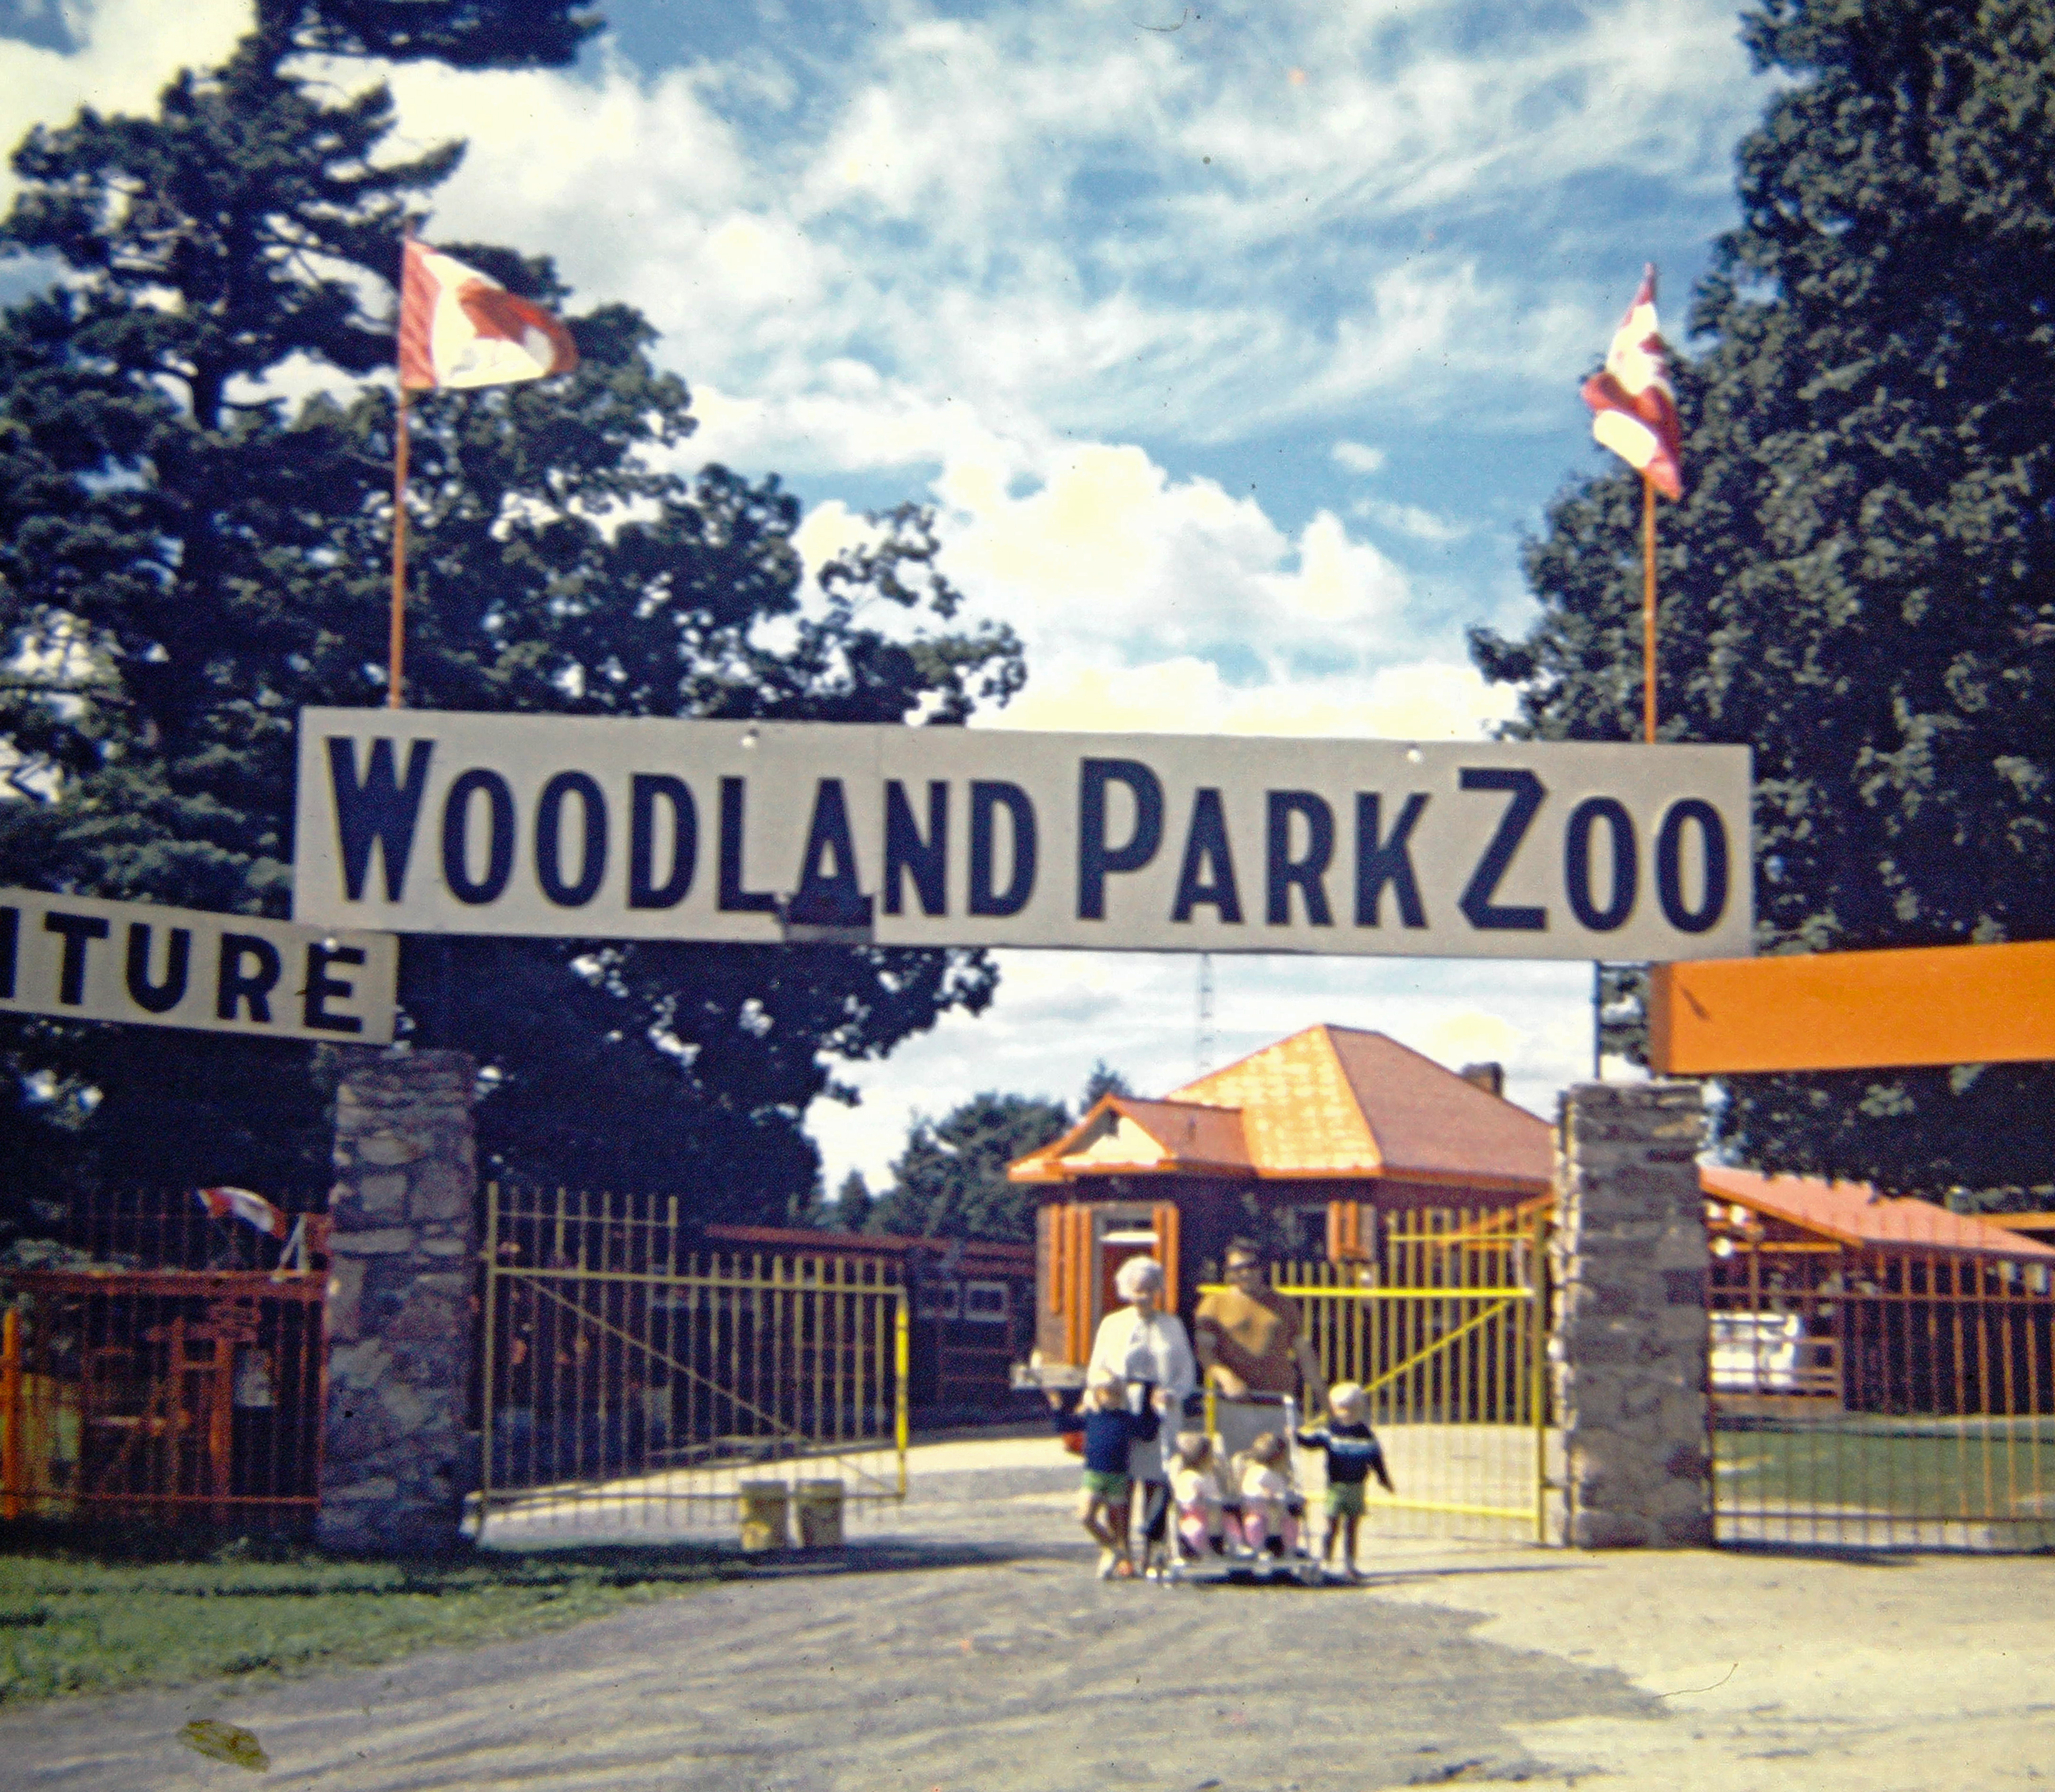 Woodland Park Zoo (west of Brockville) with Nana